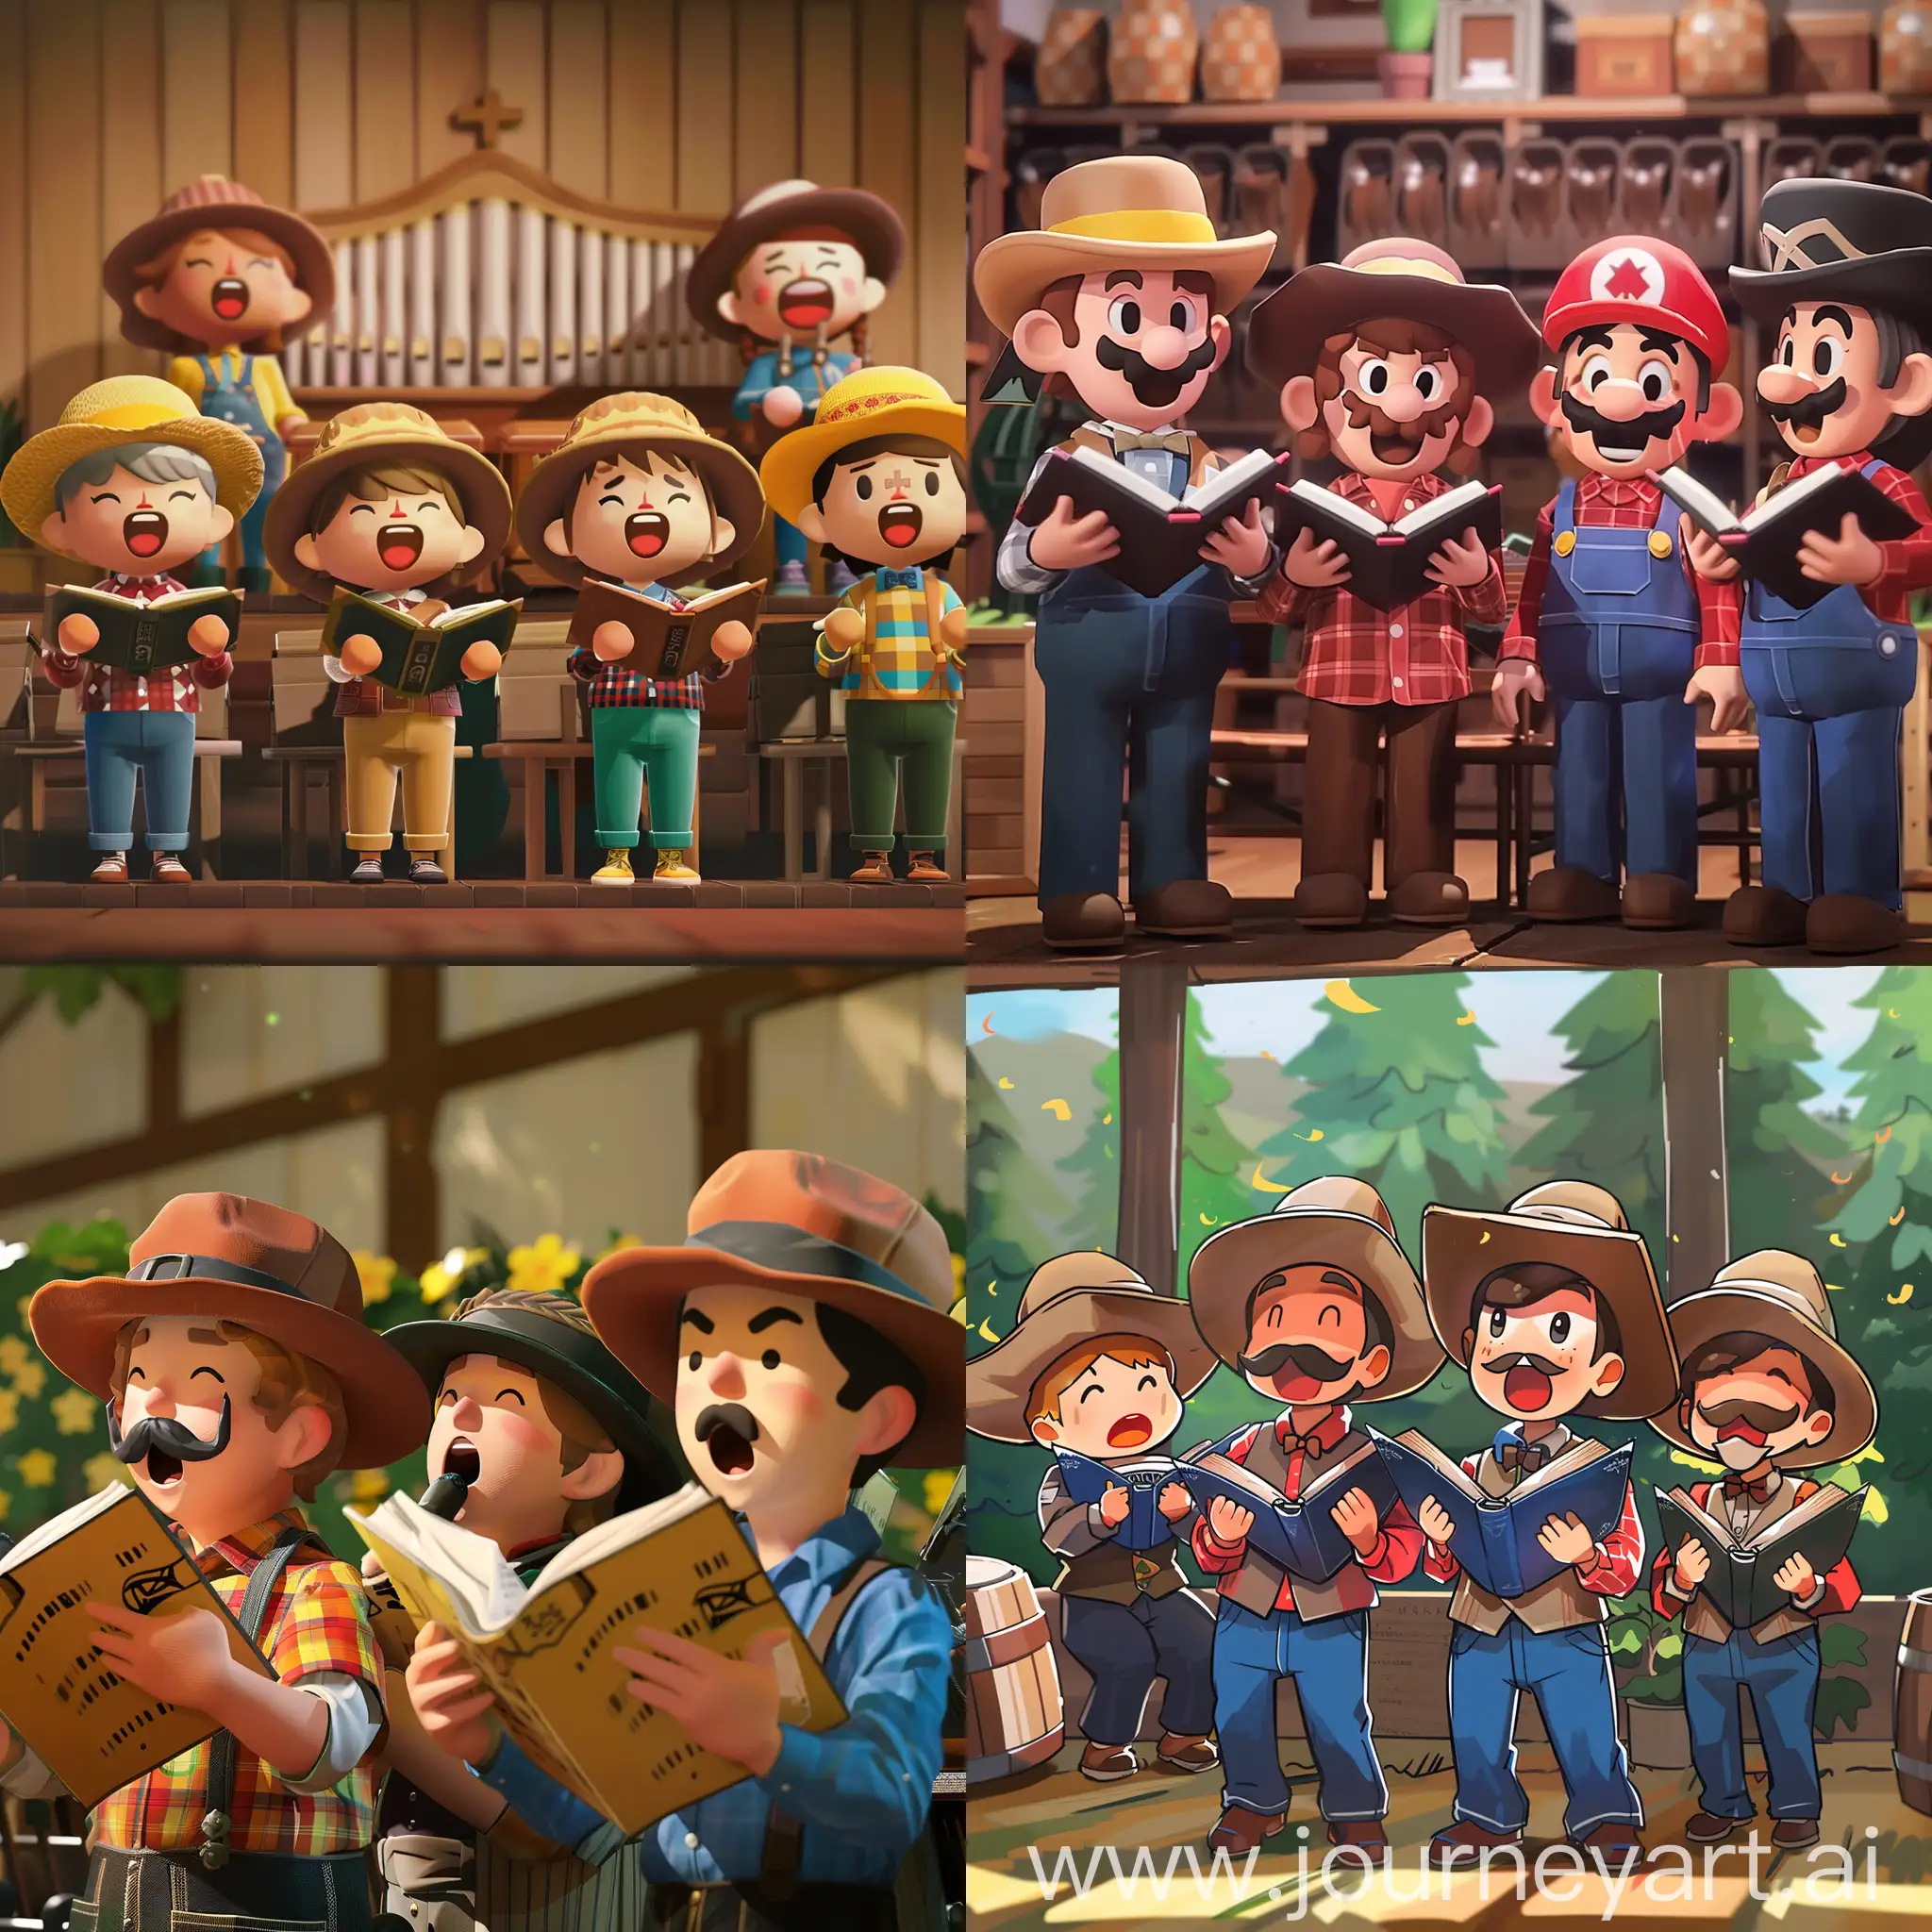 Video game characters dressed as farmers singing loudly at a shape note singing convention